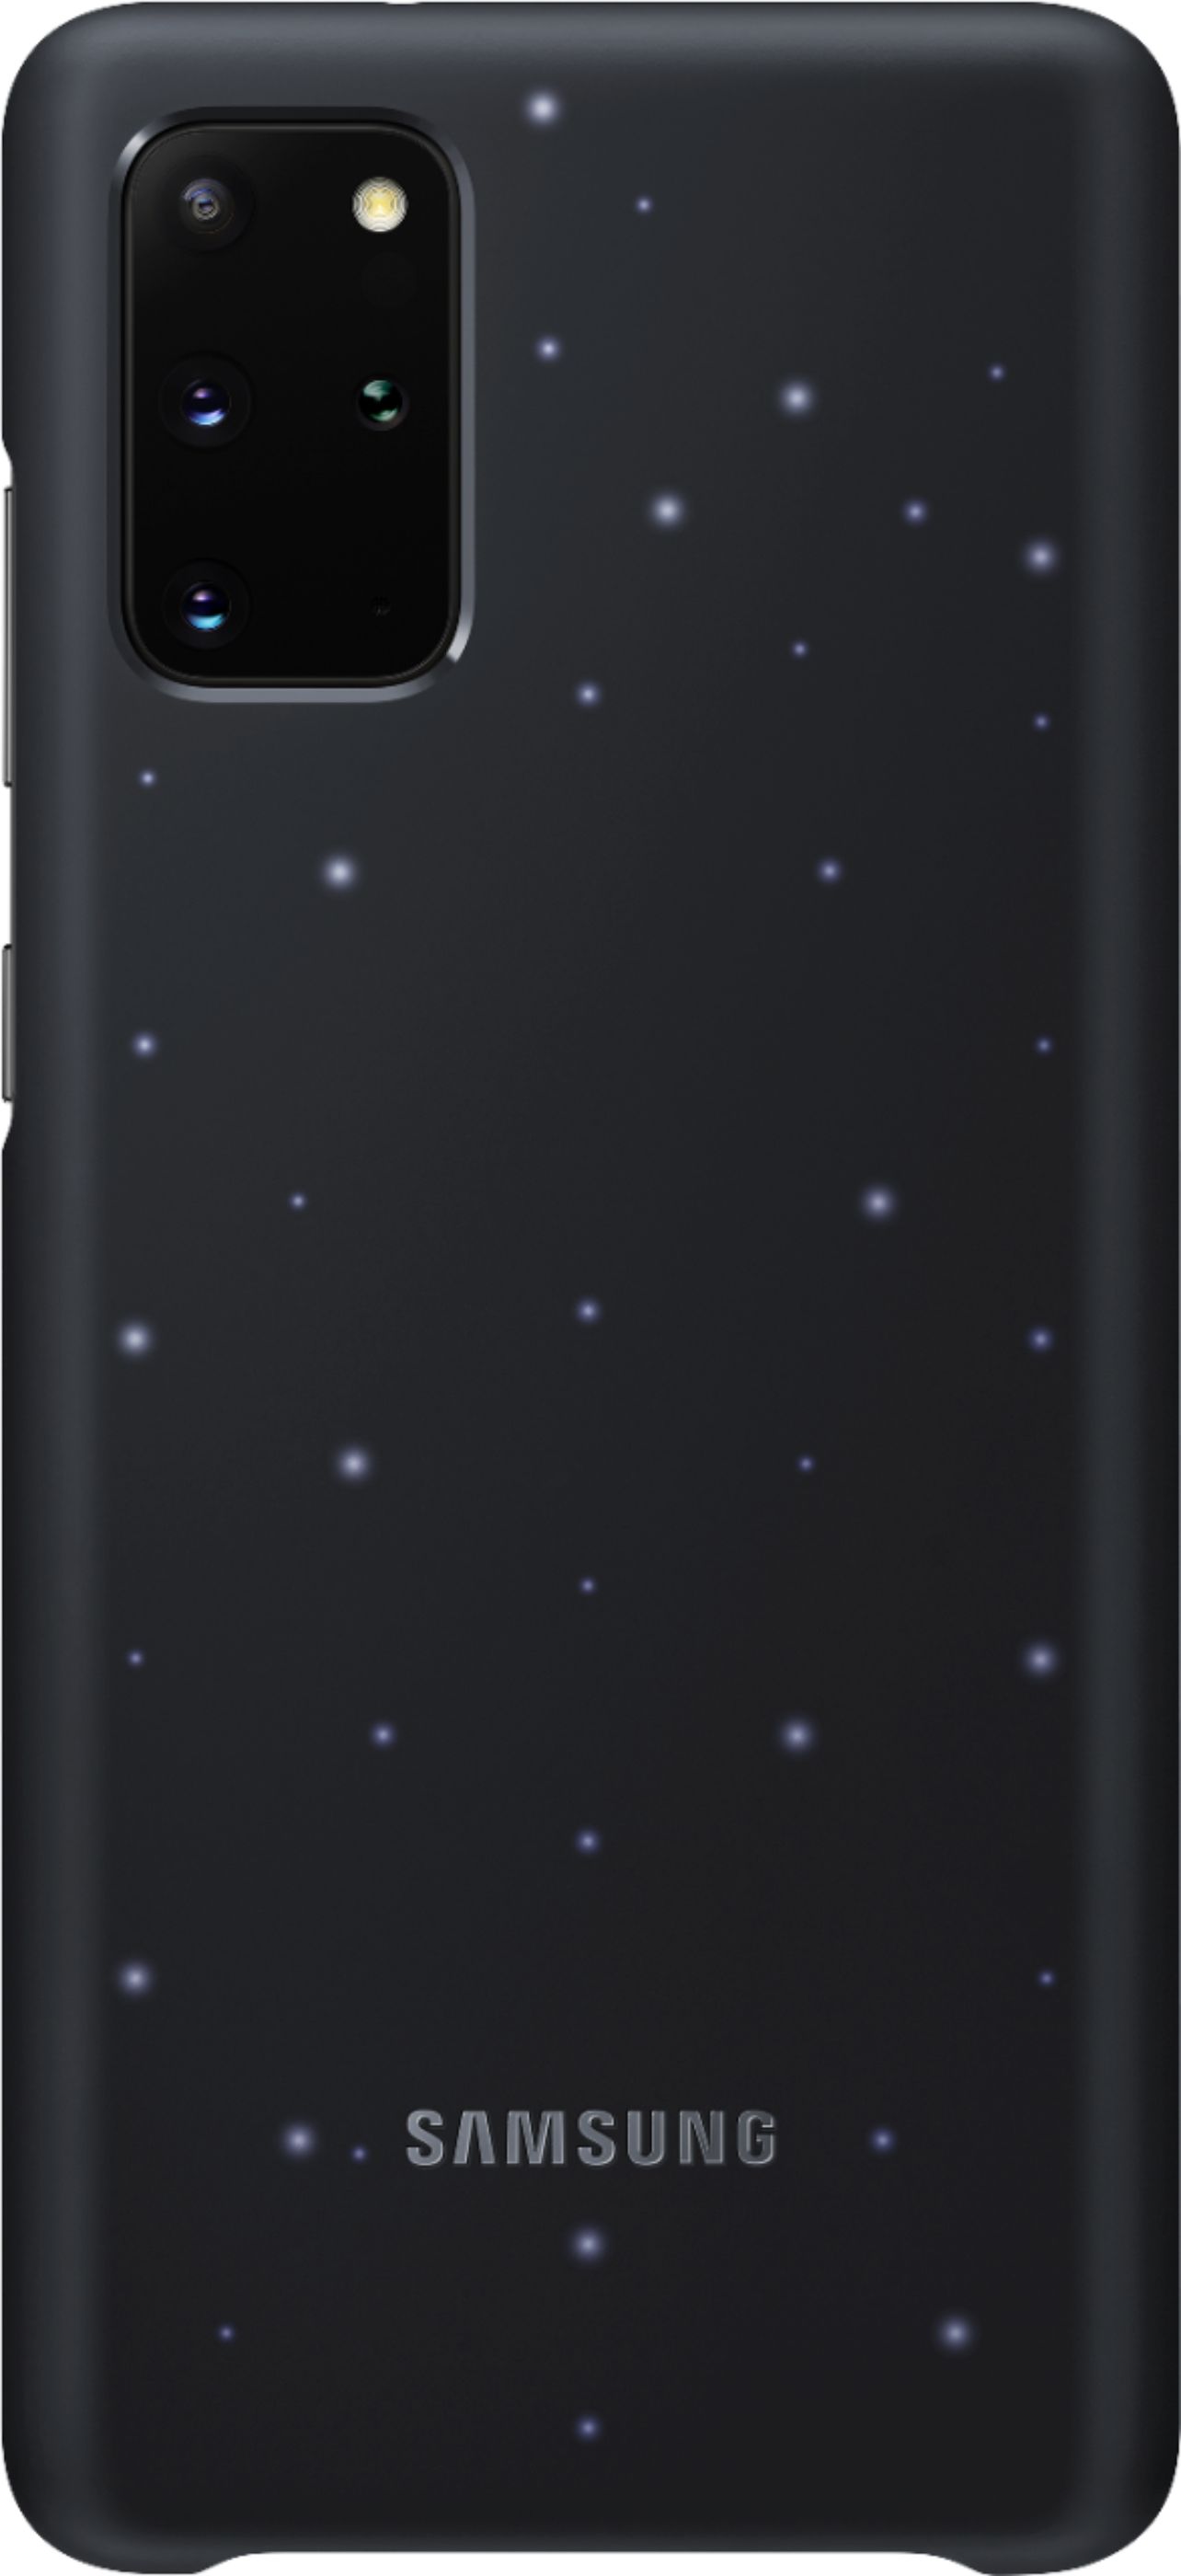 LED Back Cover Case for Samsung Galaxy S20+ 5G - Black